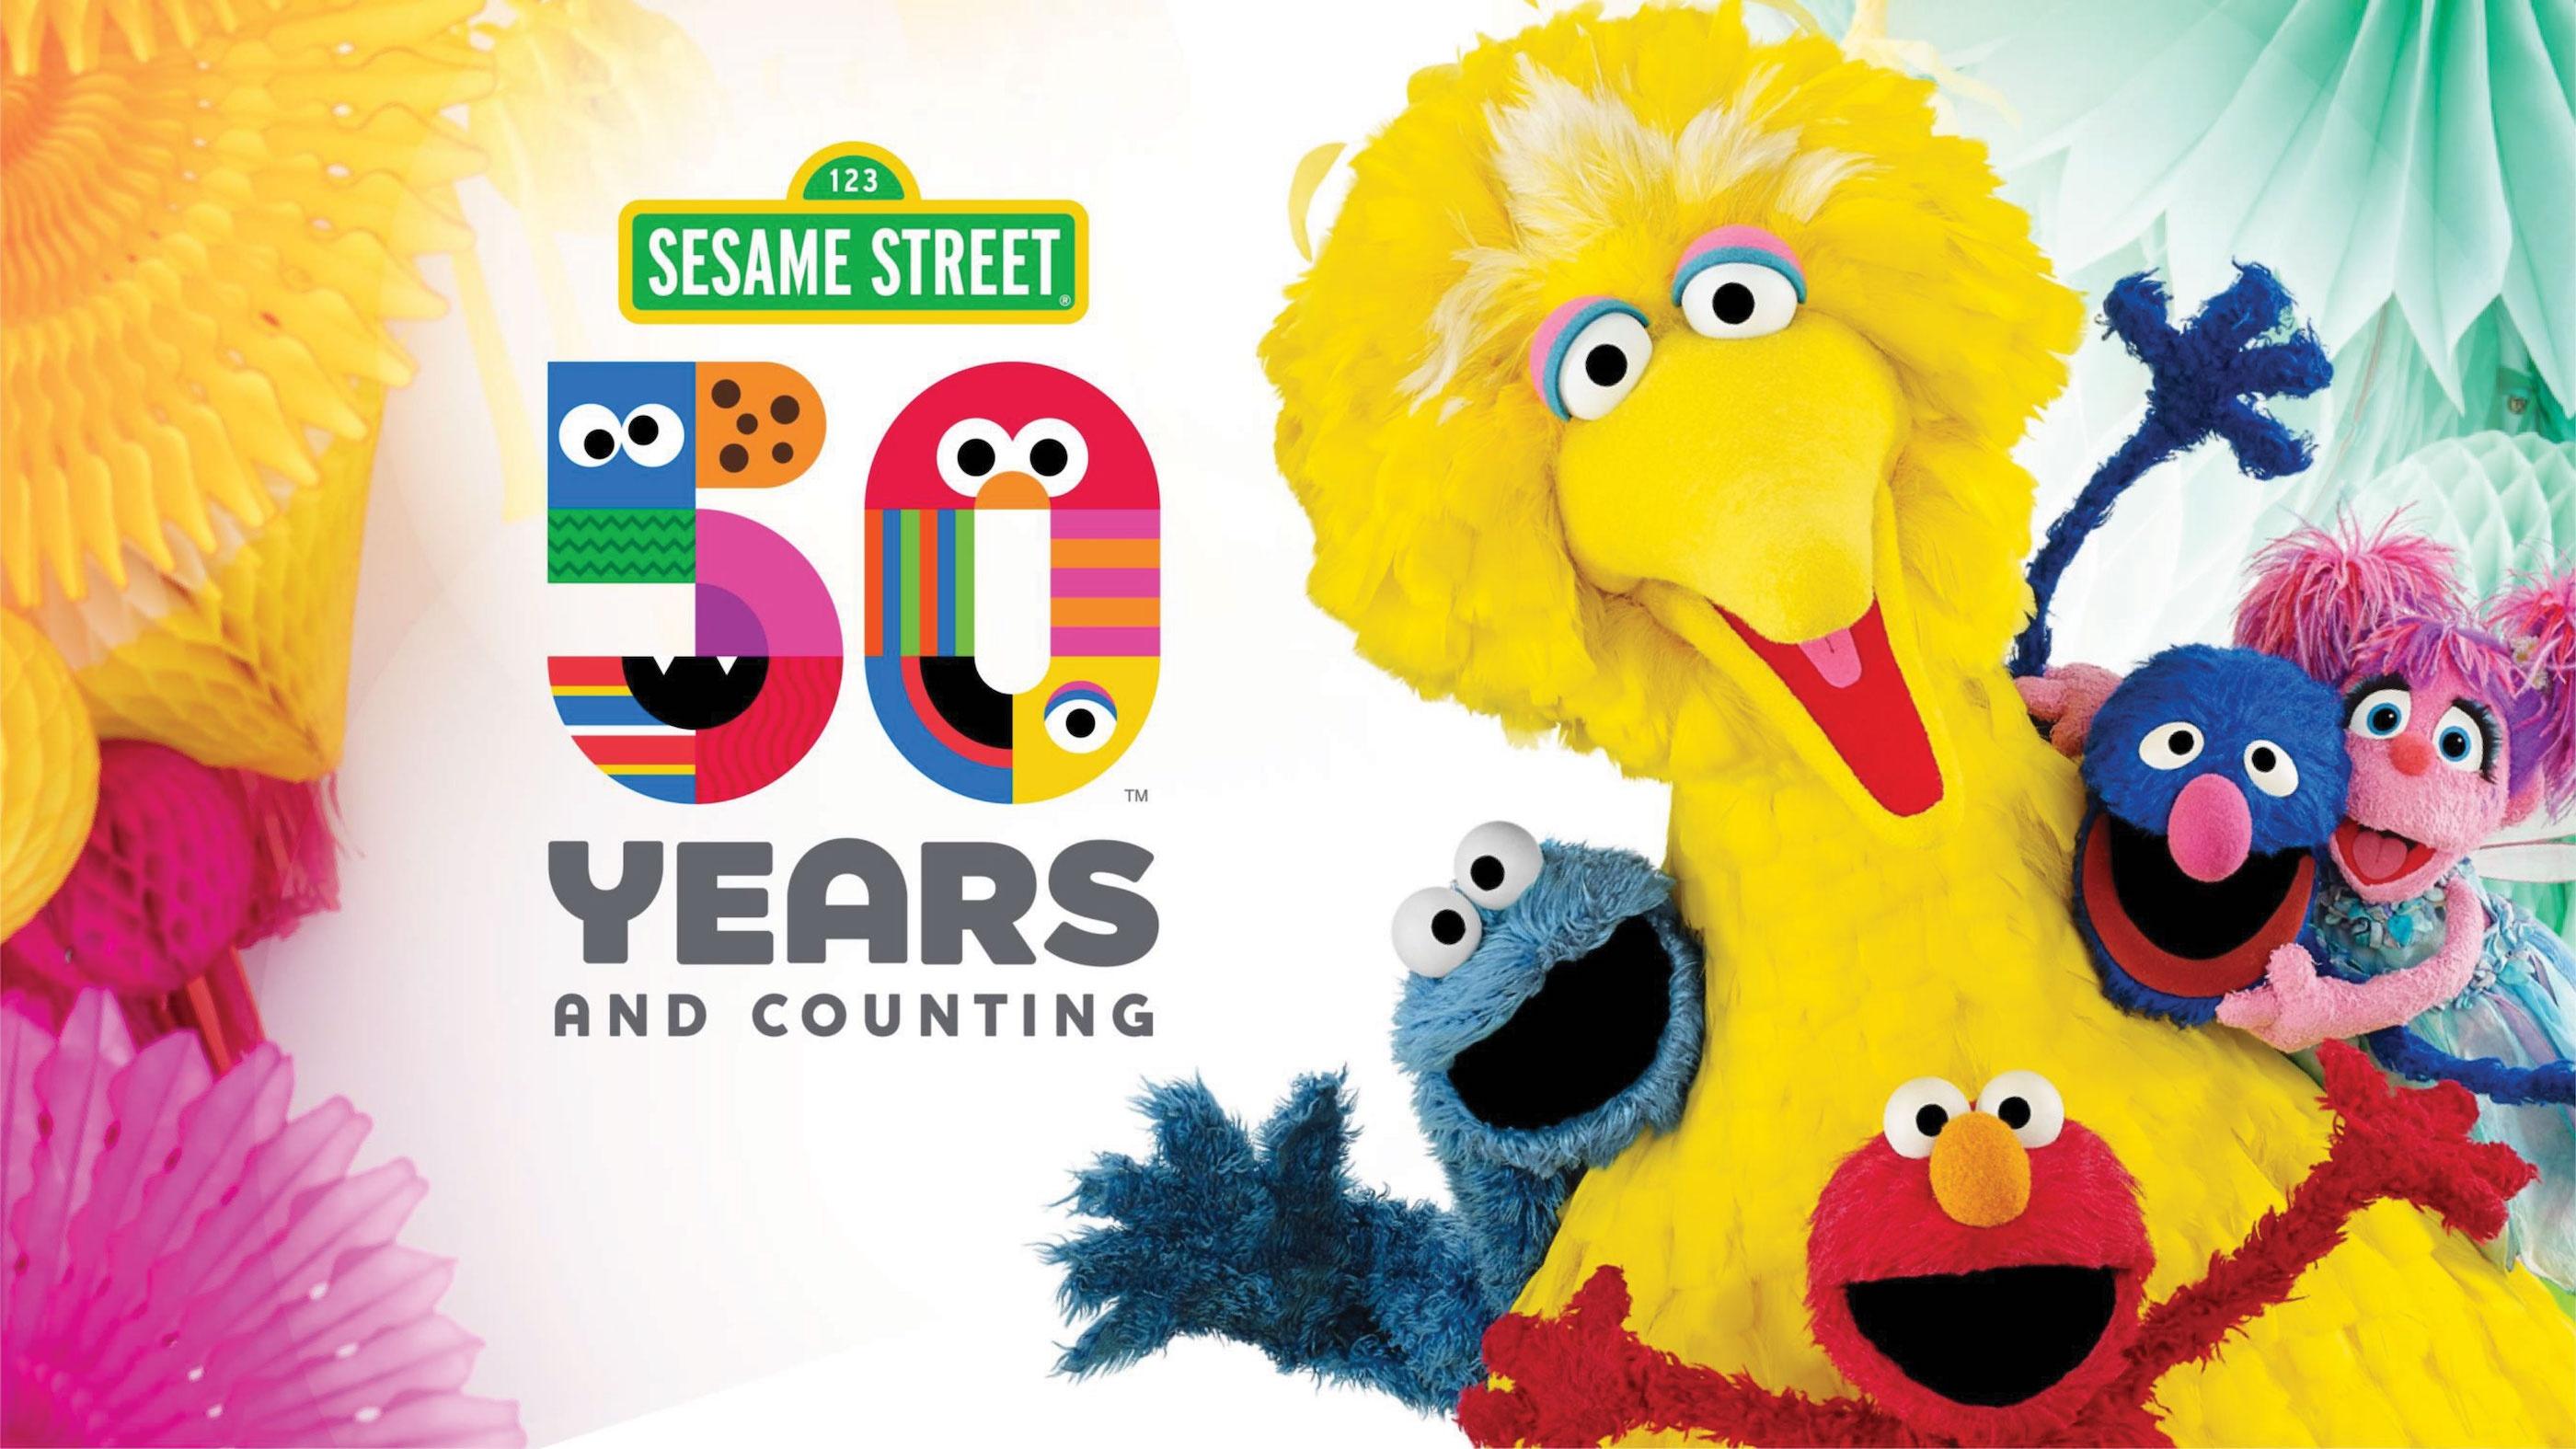 Pbs Newshour How Sesame Street Supports Families 50 Years After Debut Kcts 9